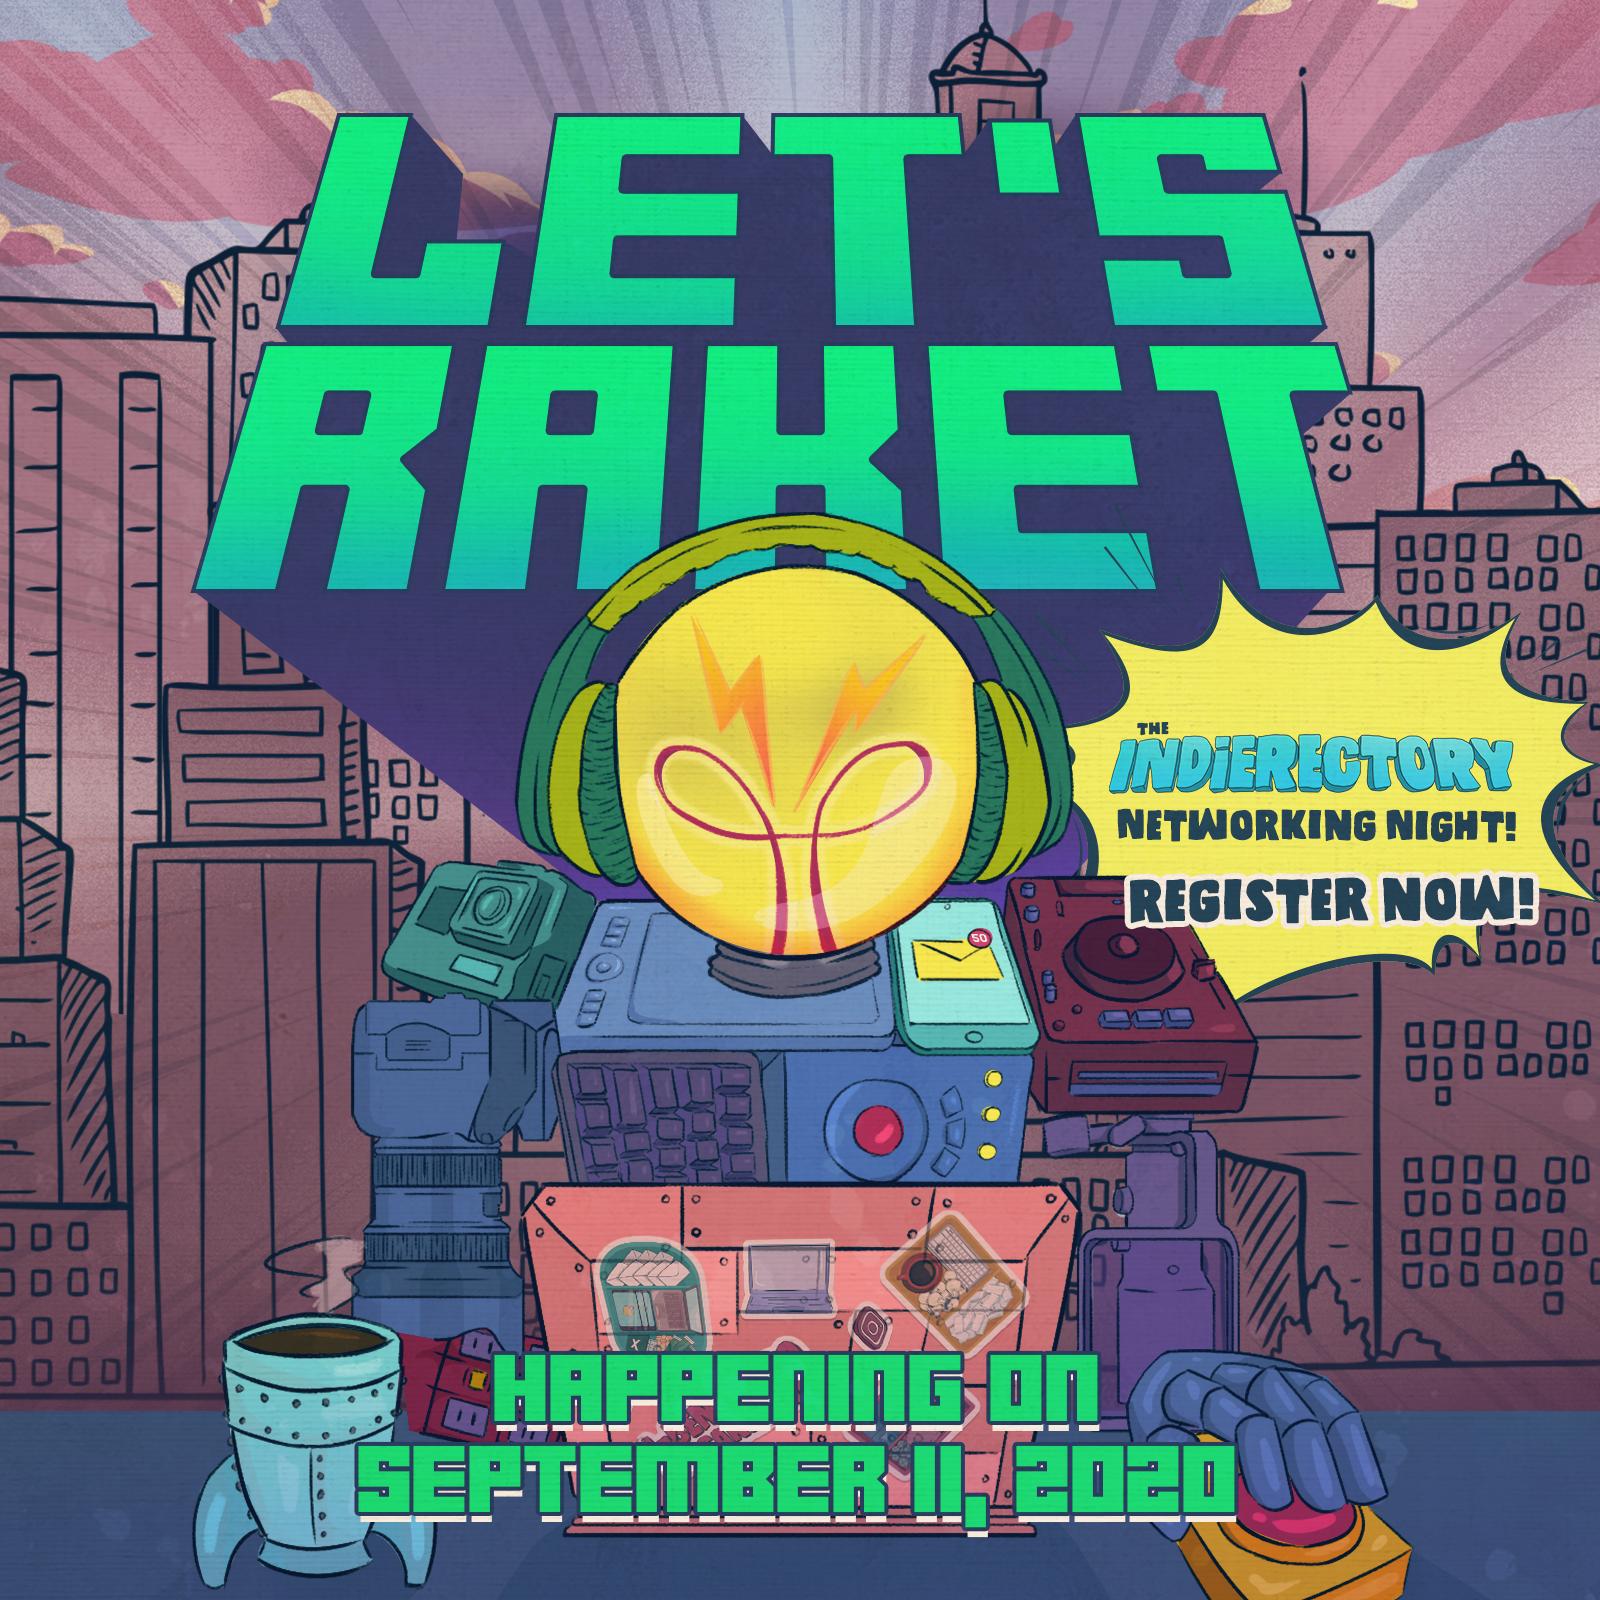 REGISTER NOW! Updated schedule of Let’s Raket: The Indierectory’s Networking Night